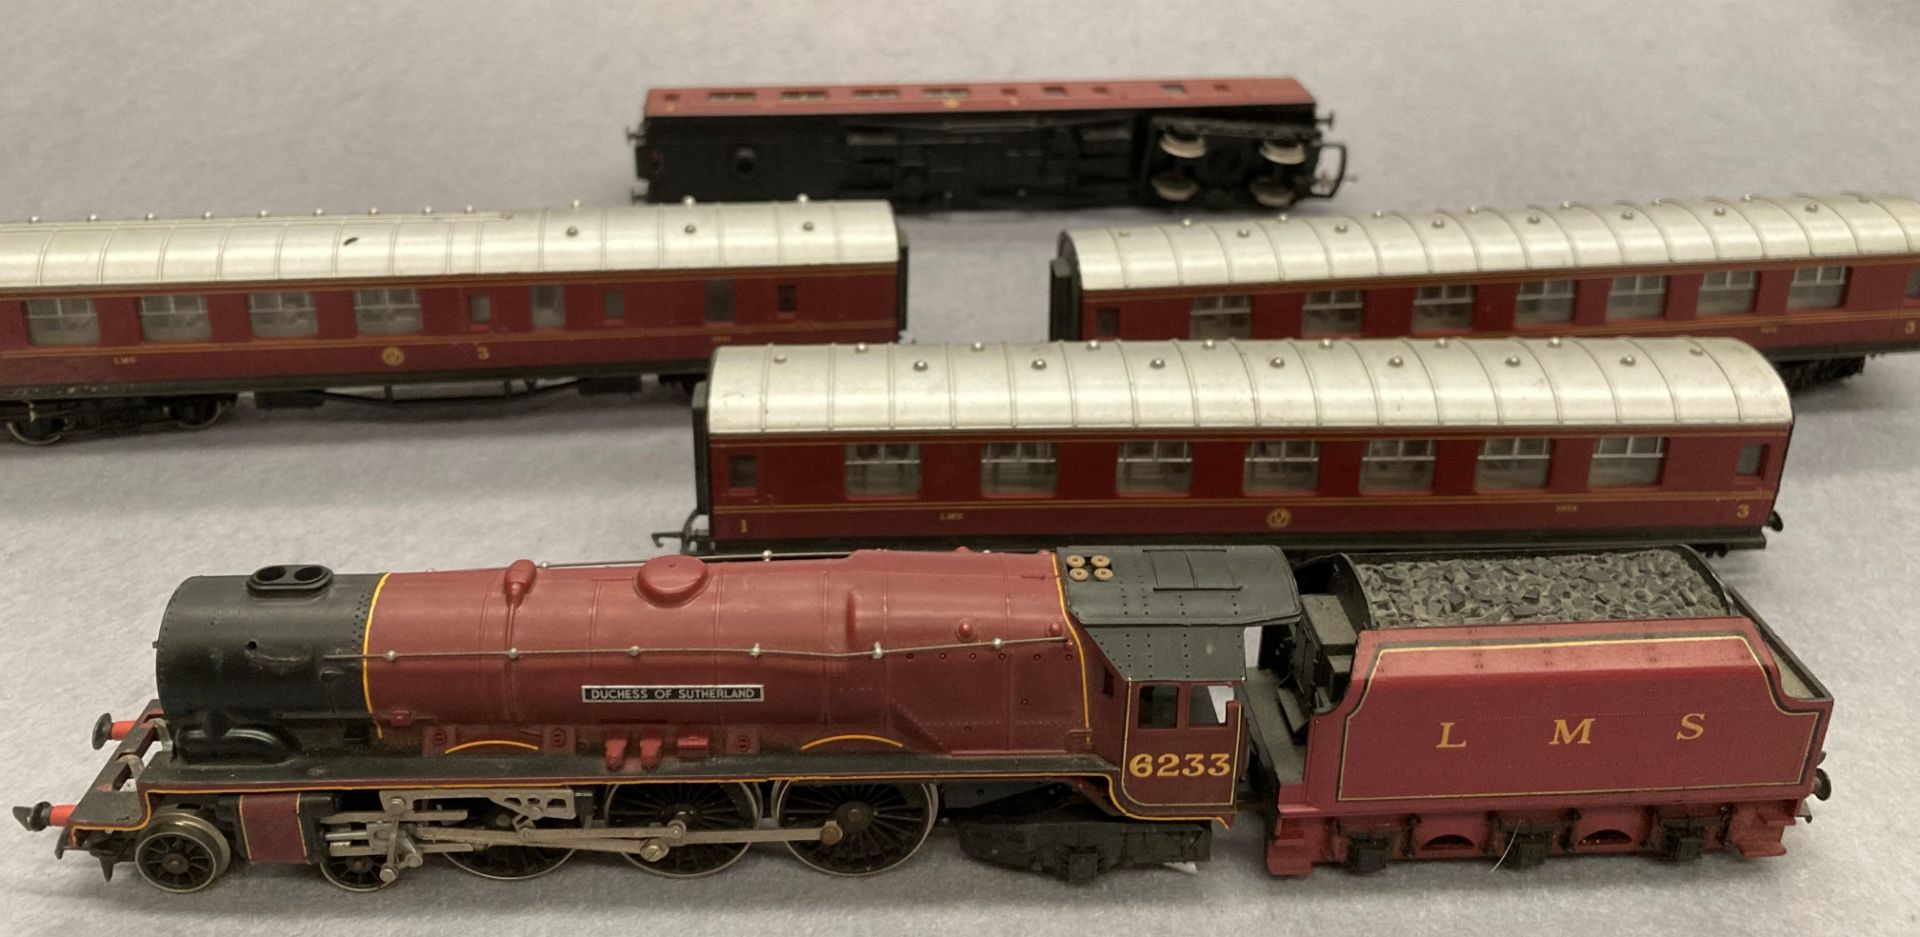 Hornby LMS 6233 scale model Duchess of Sutherland steam locomotive and four carriages - Image 2 of 2